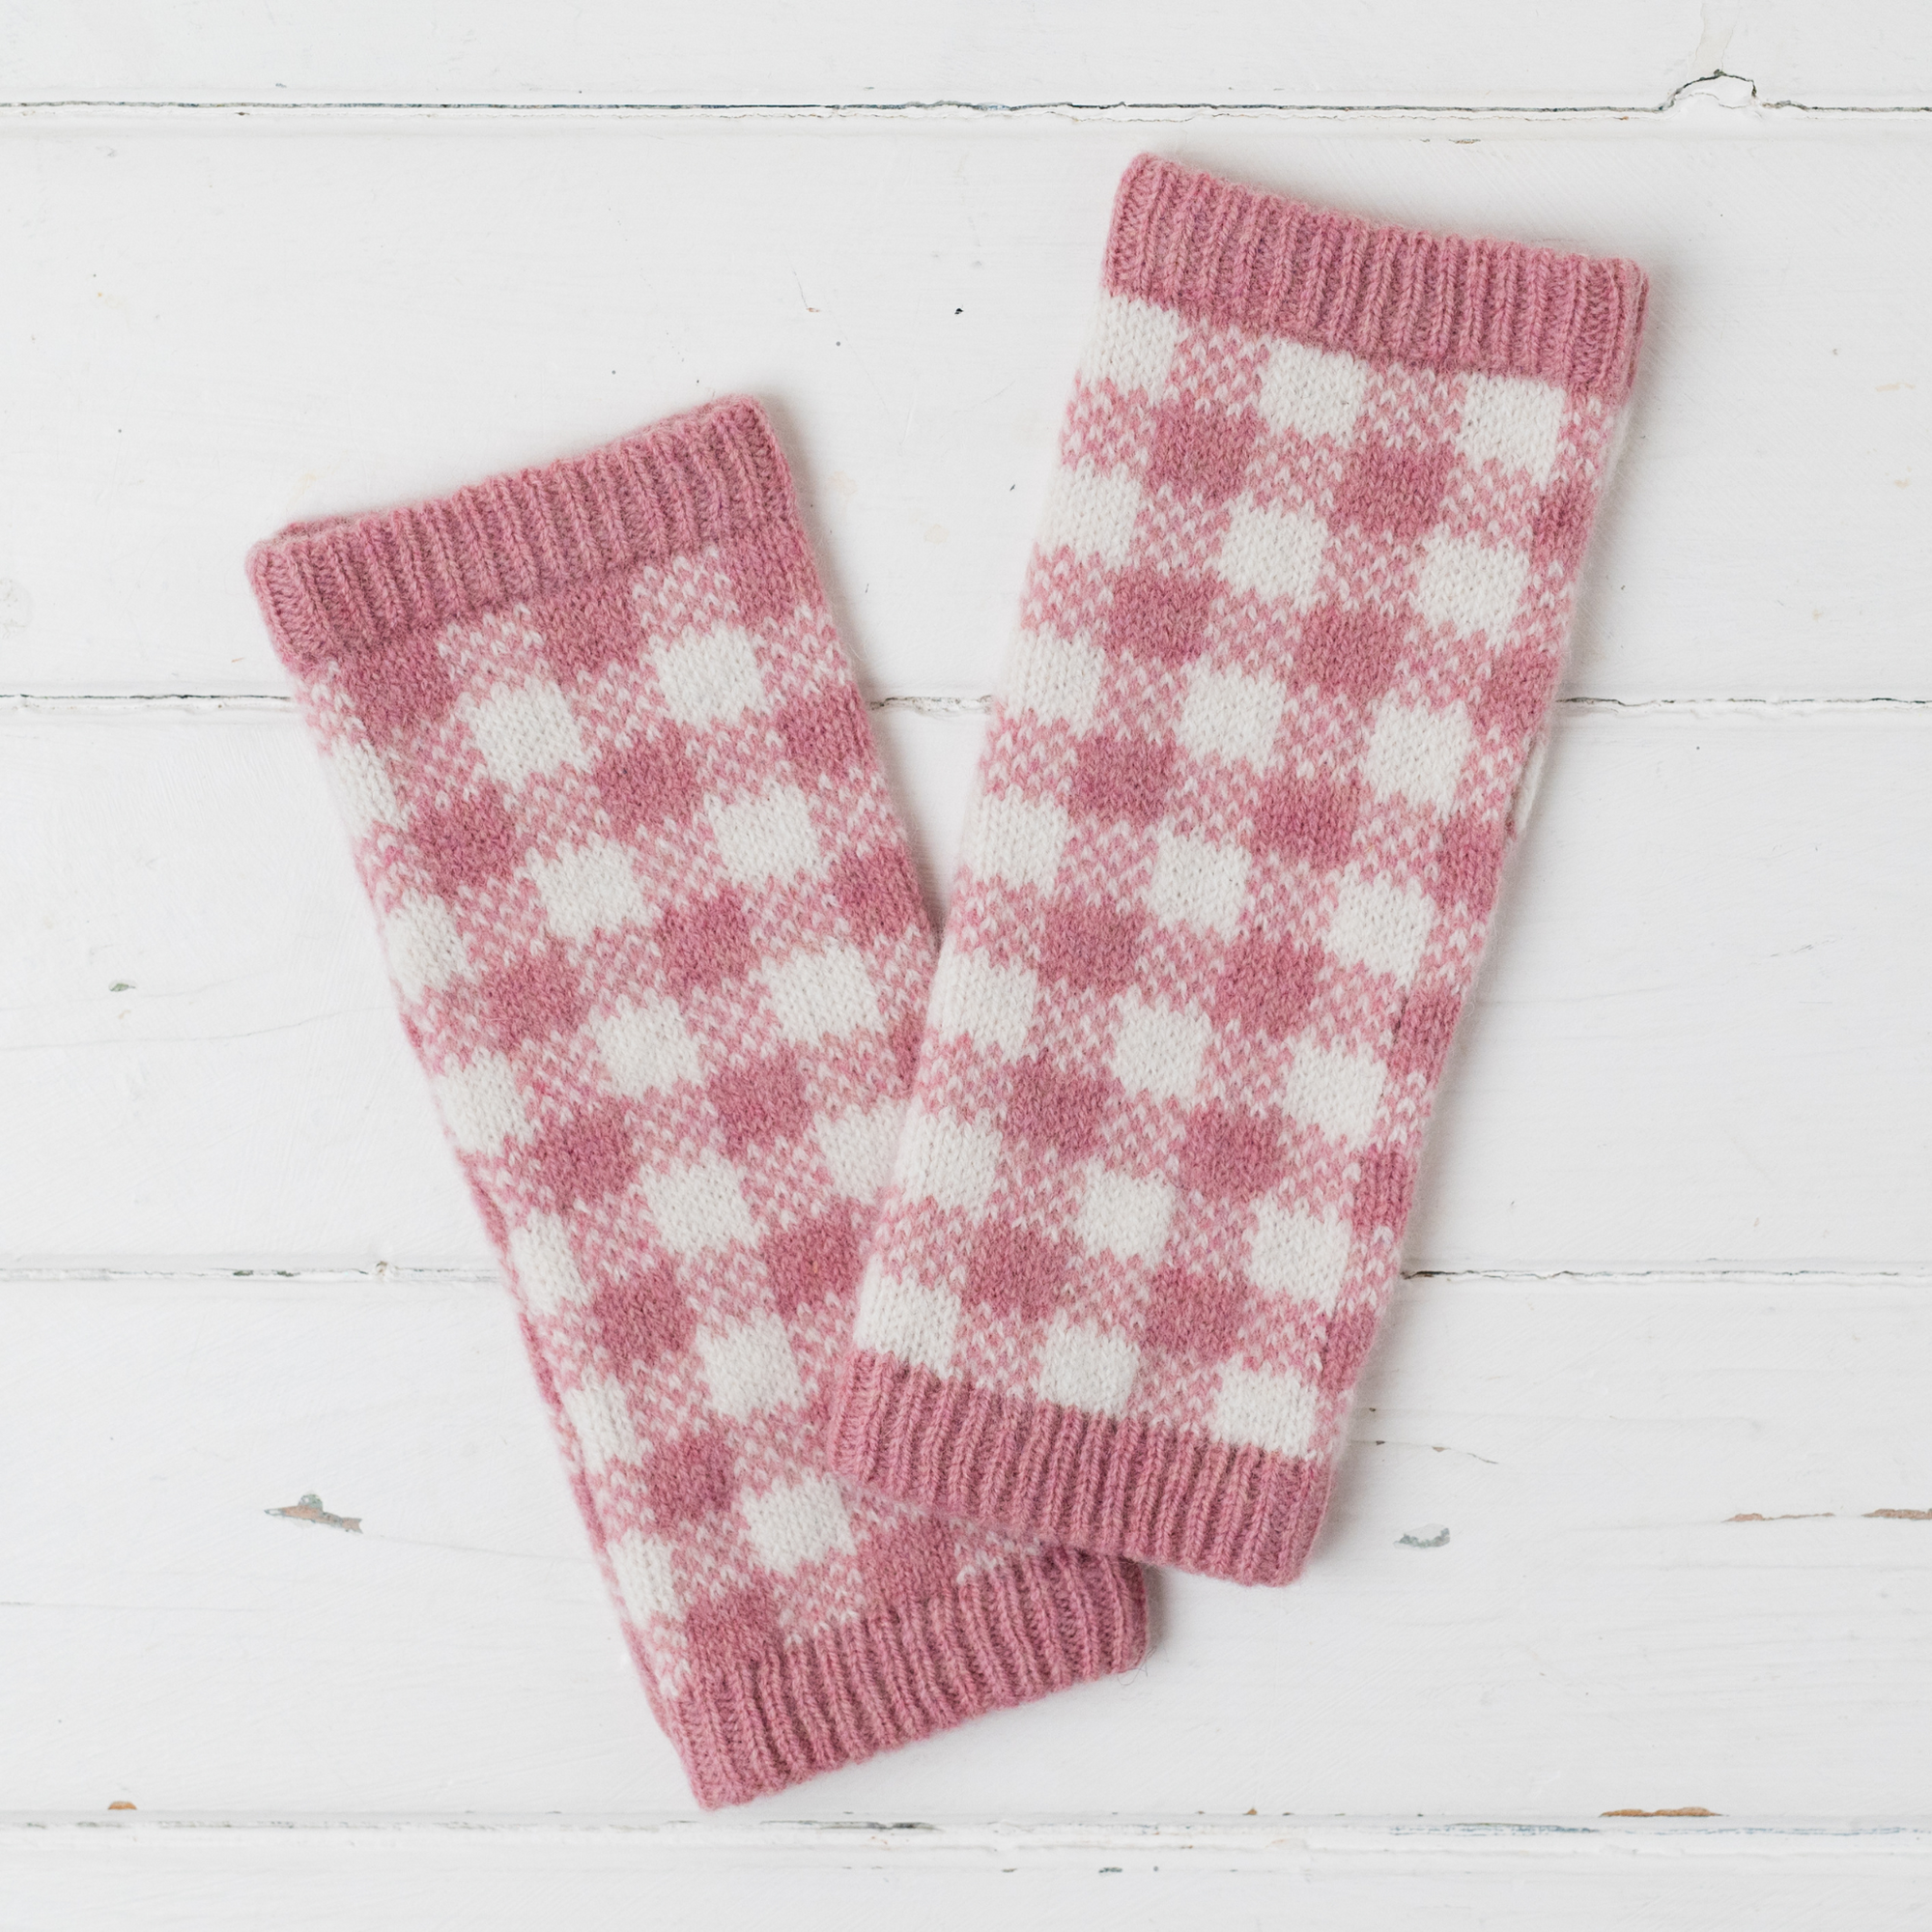 Gingham wrist warmers - pink and white